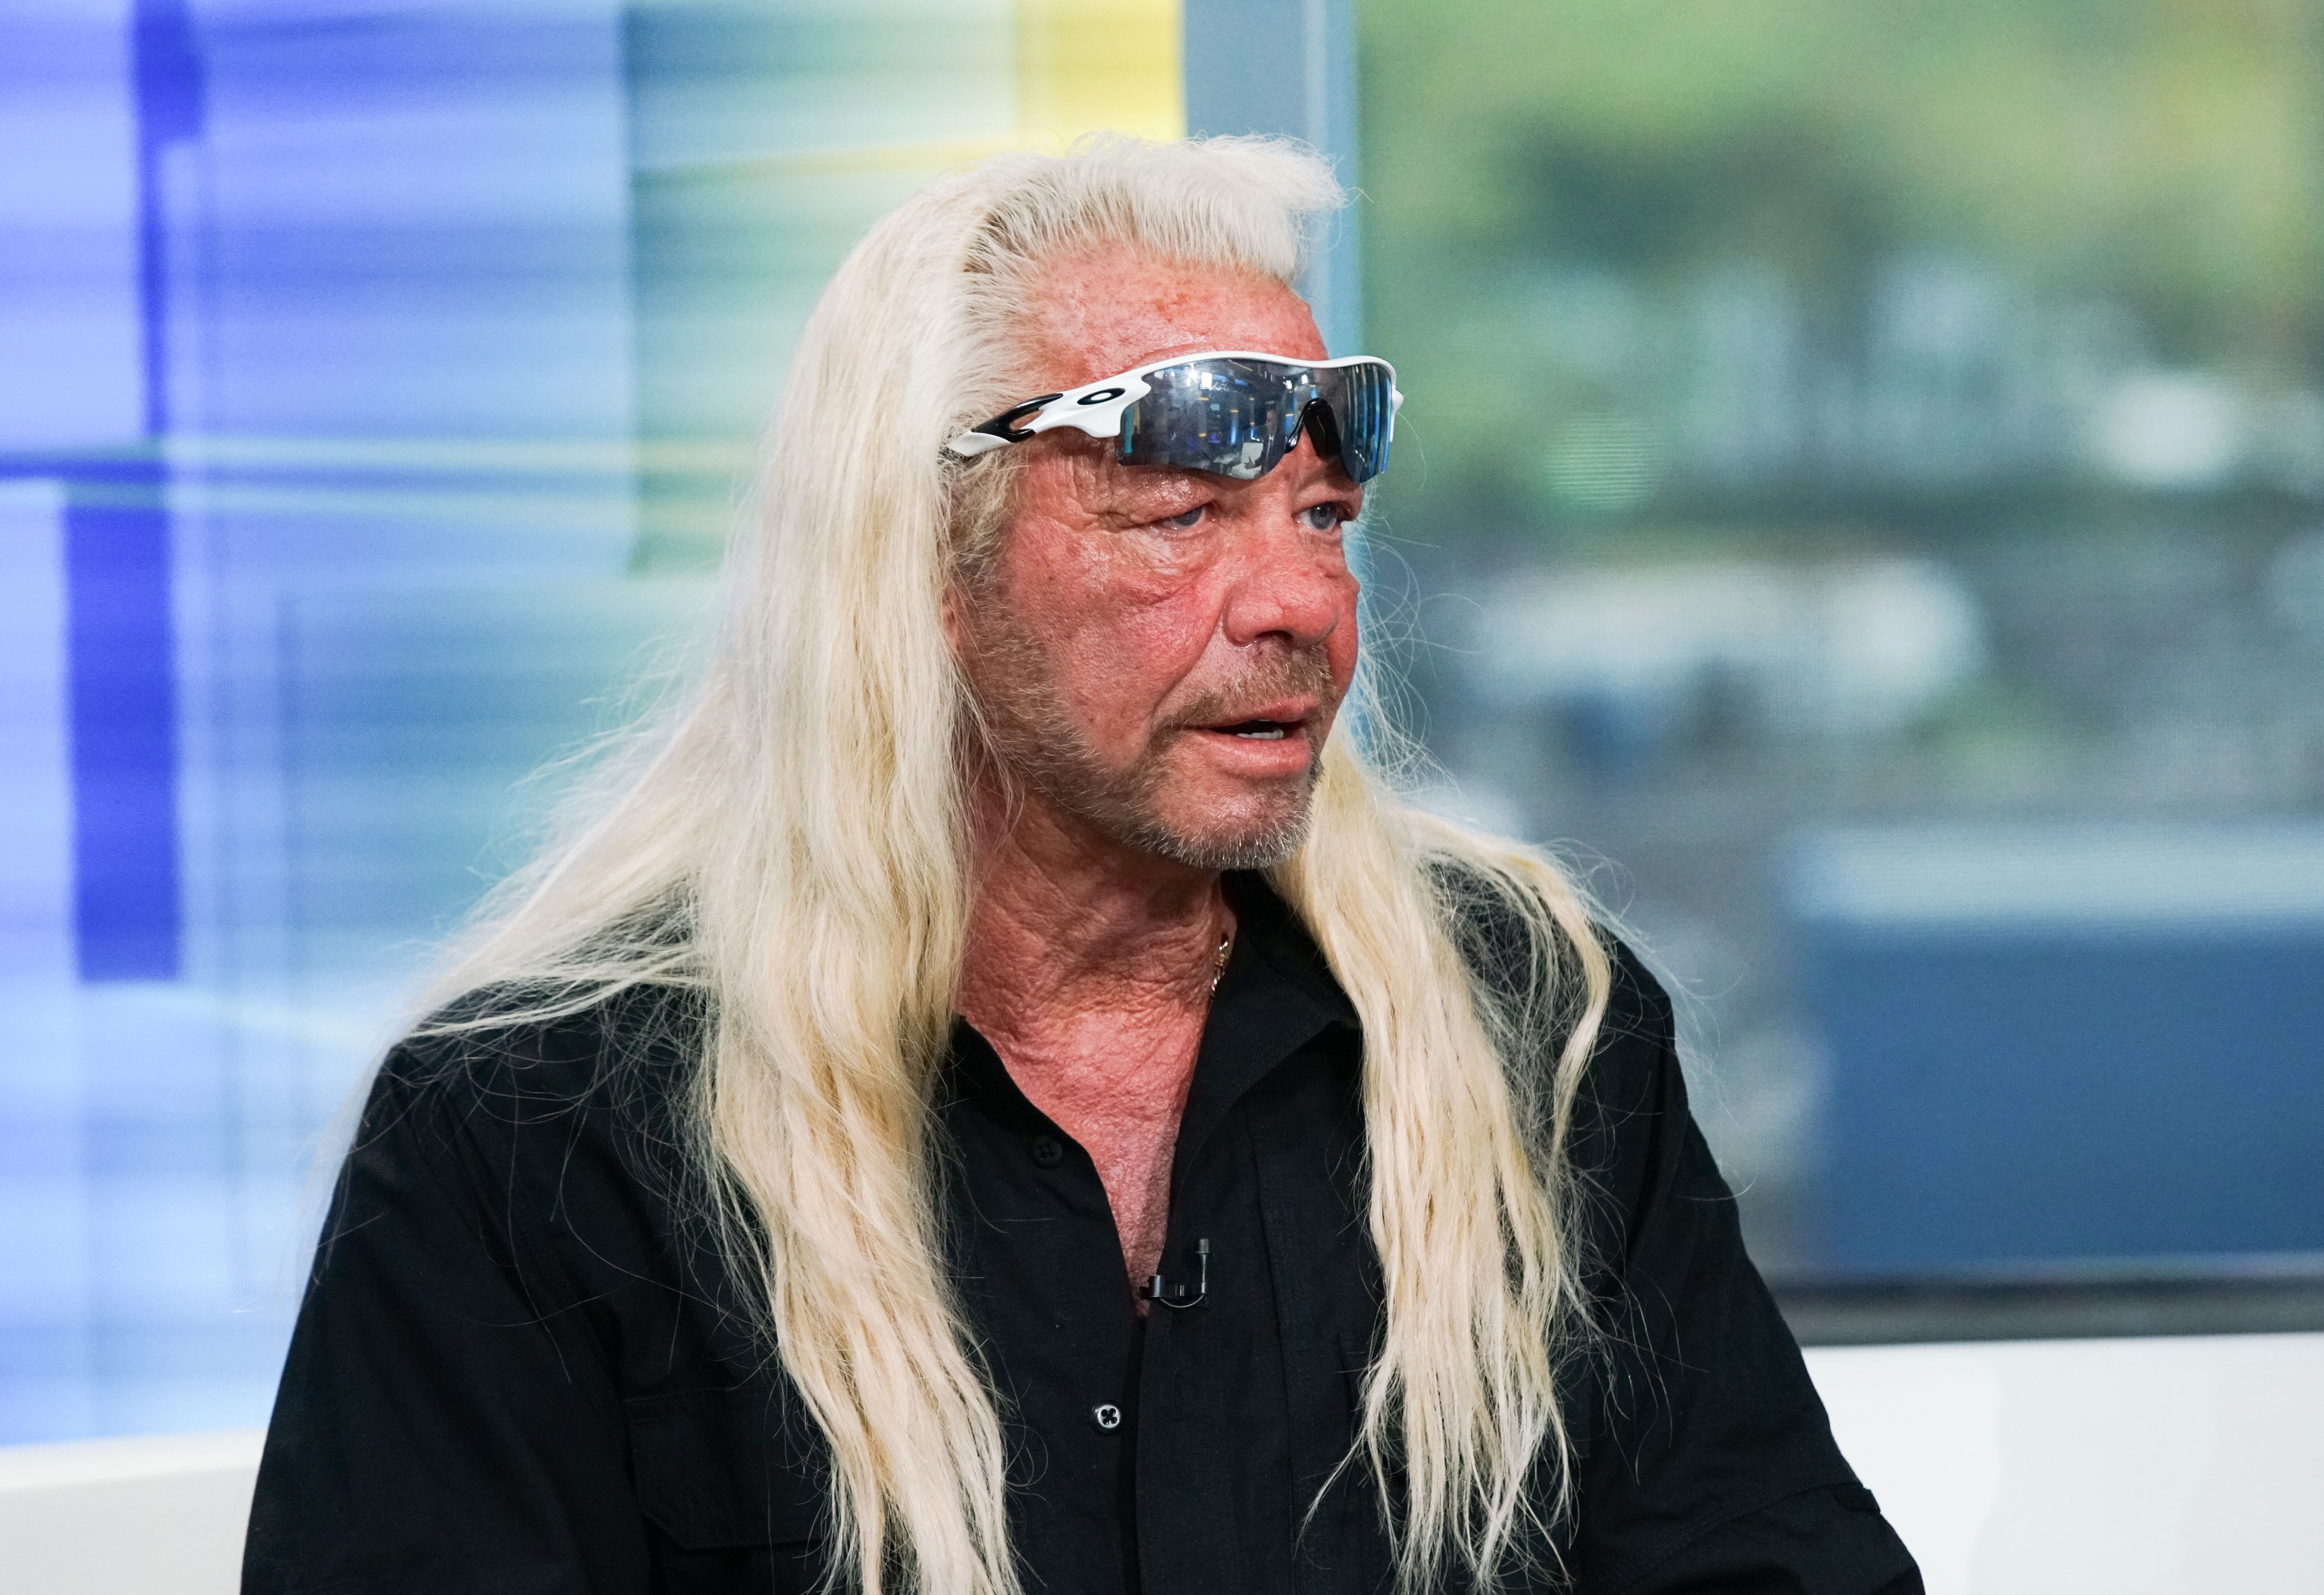 Duane Dog Chapman on August 28, 2019 in New York City | Photo: Getty Images